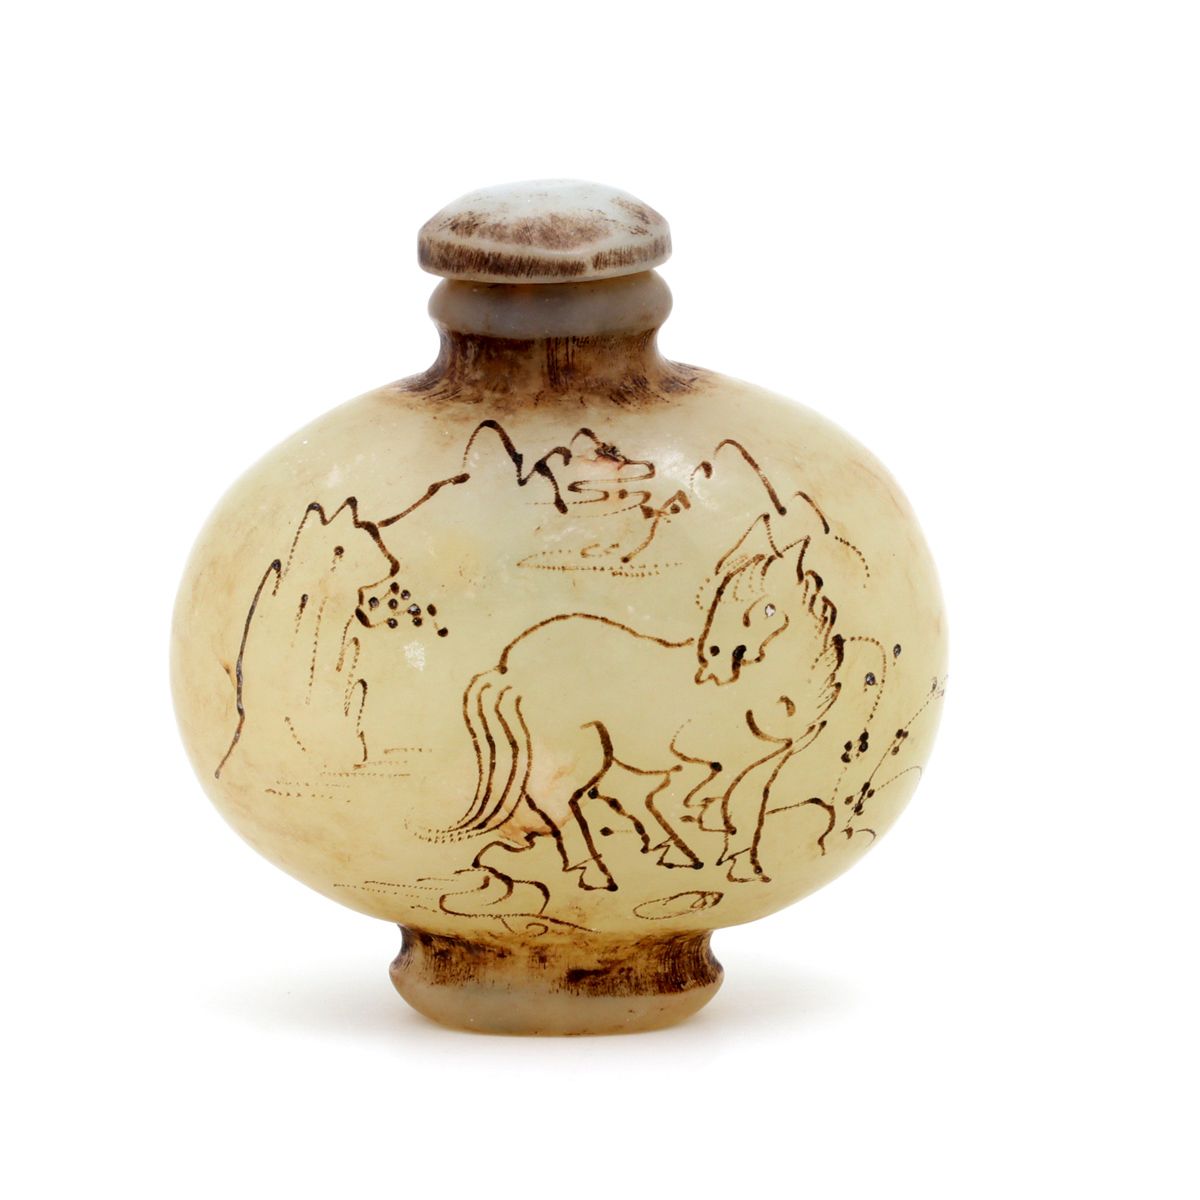 A SNUFF-BOTTLE A SNUFF-BOTTLE Jade, engraved decoration depicting landscape with&hellip;